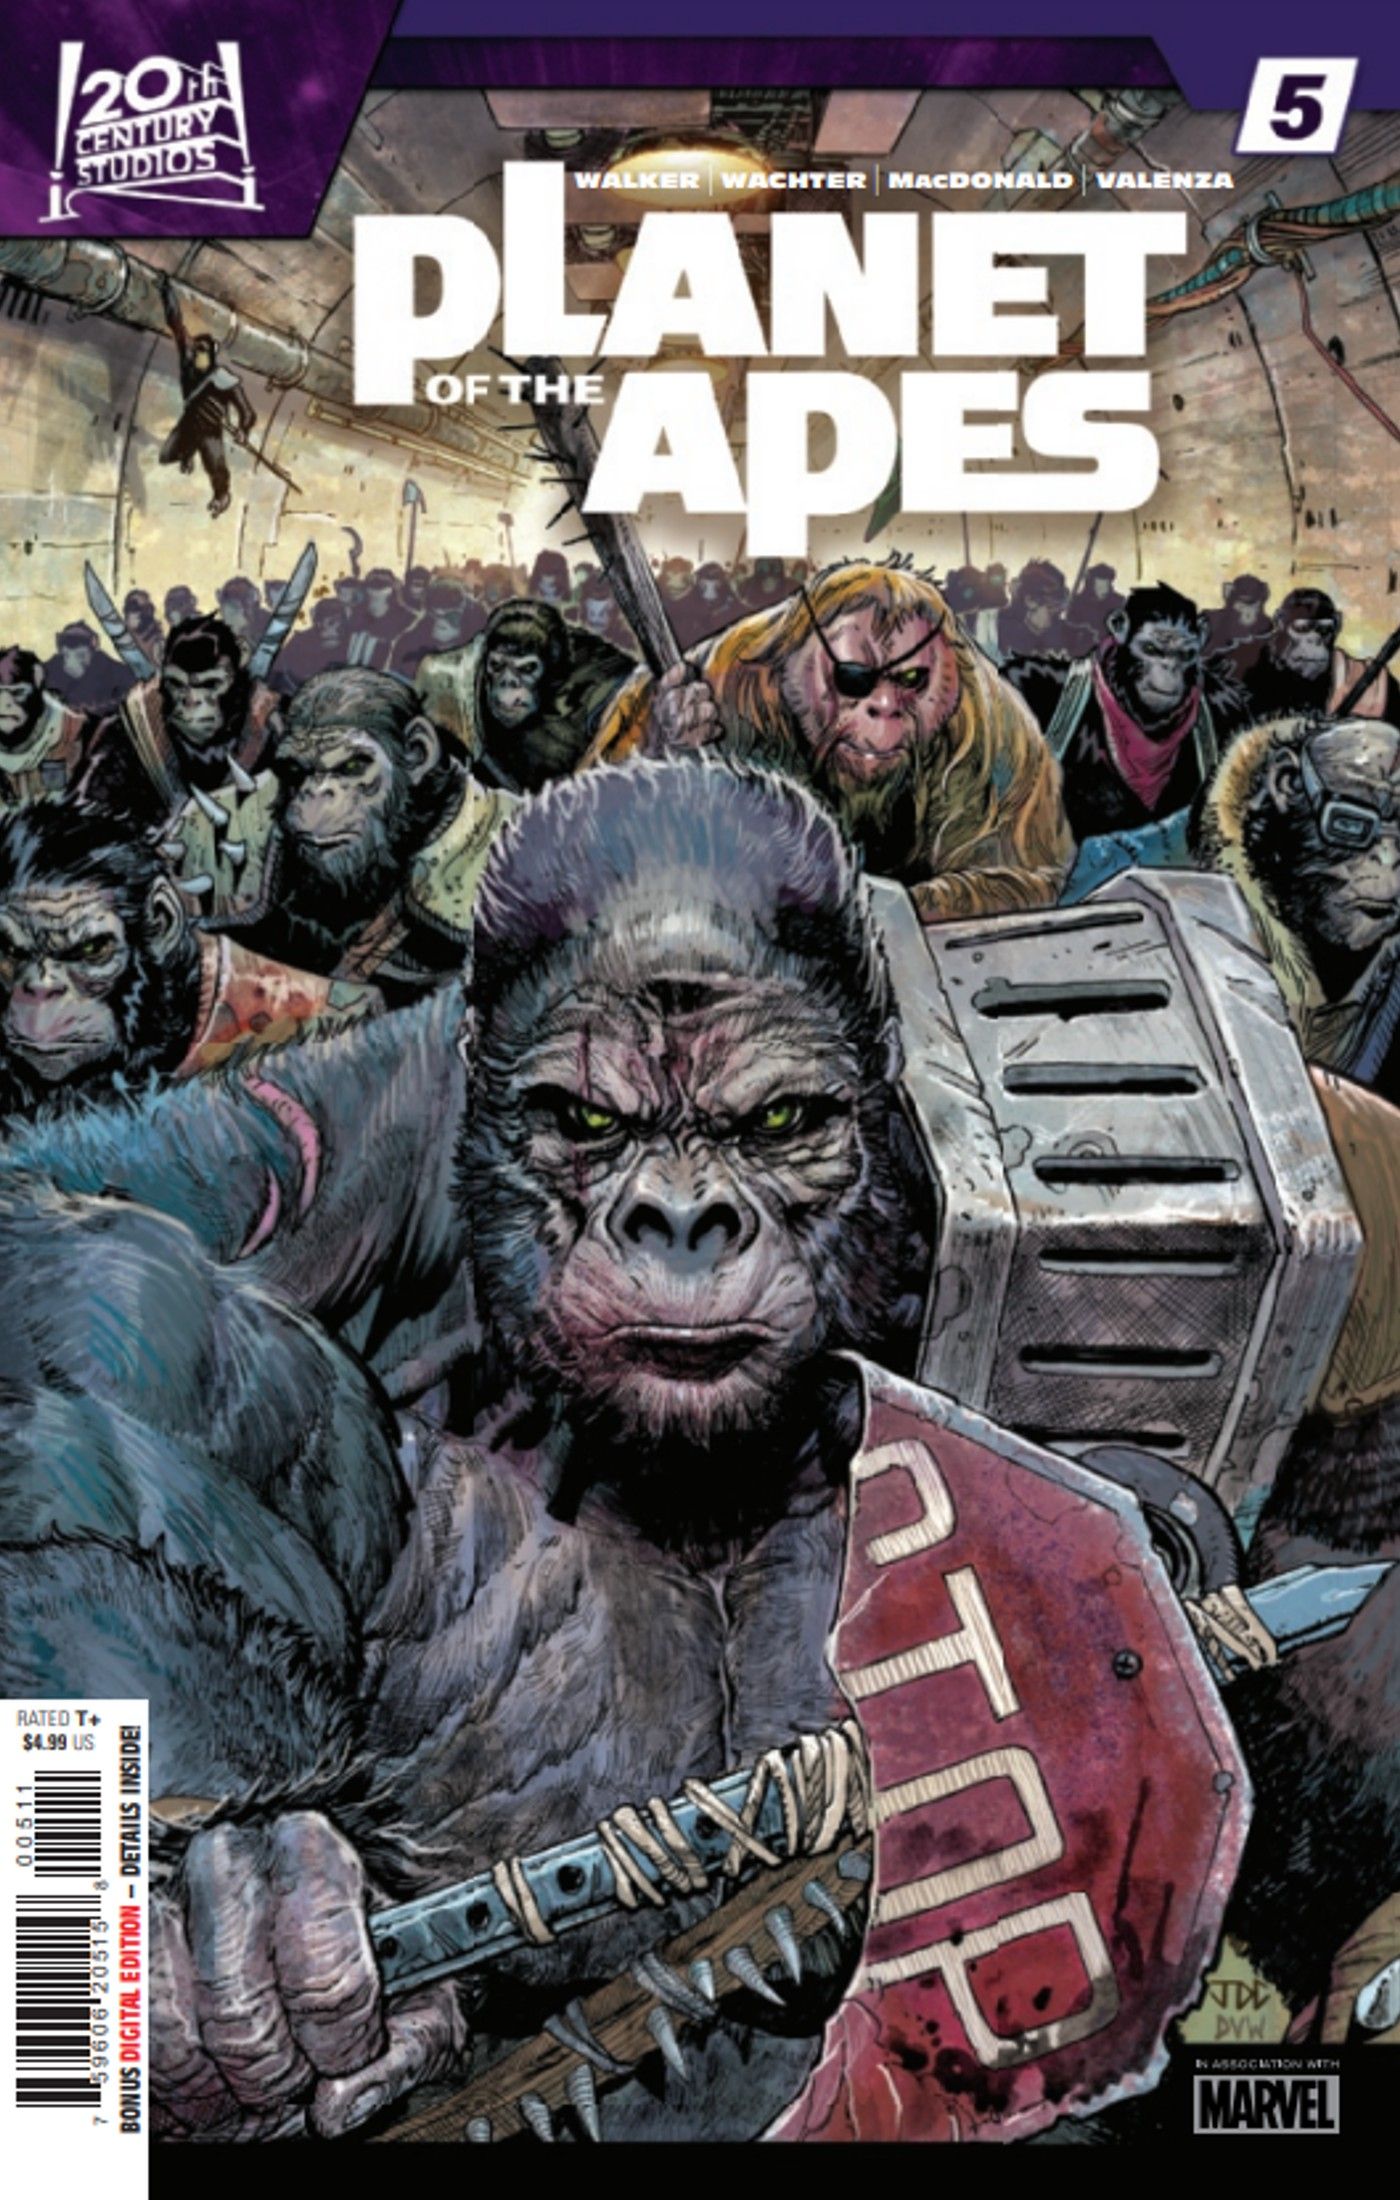 Planet of the Apes Gives Its Iconic Statue of Liberty Moment New Meaning